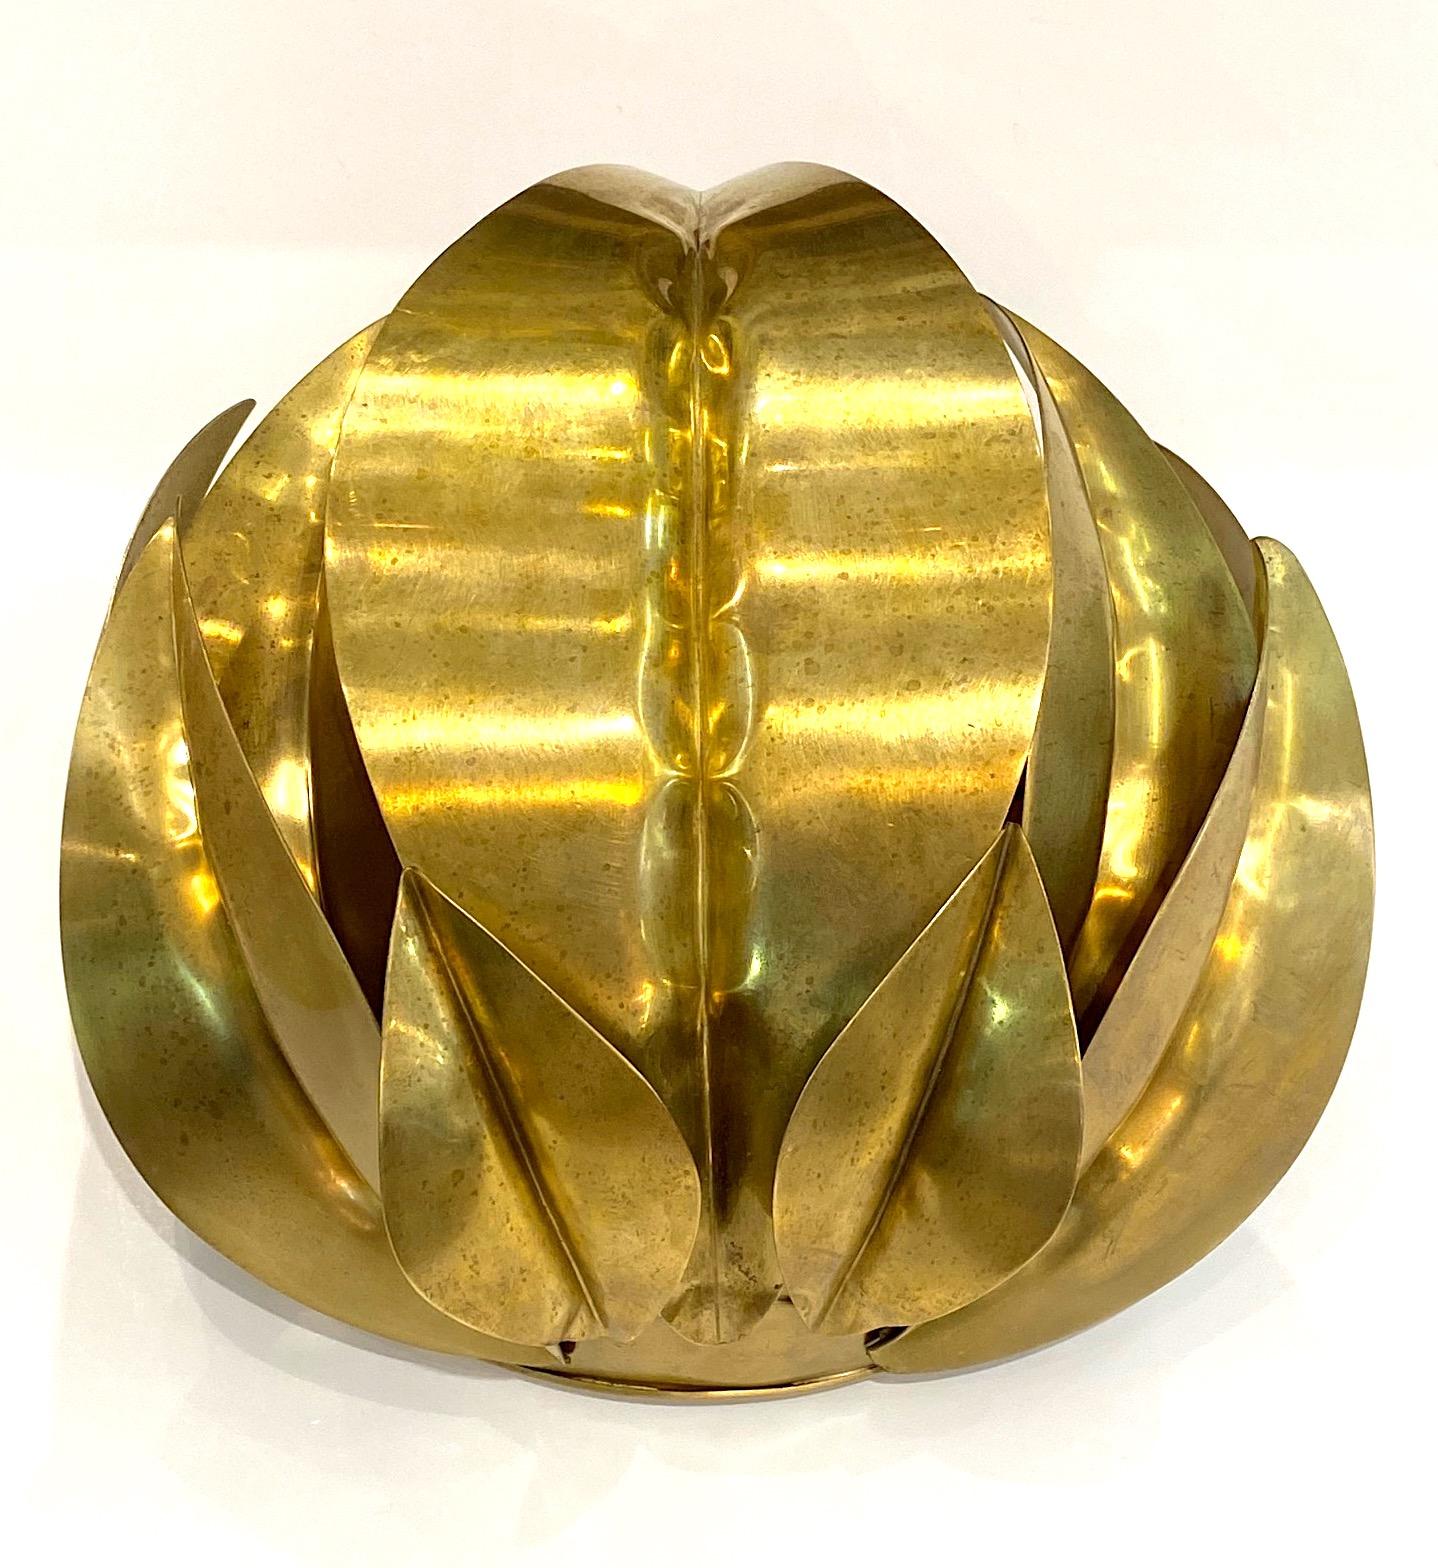 Italian 1970s leaf cluster in the manner of Tommaso Barbi, the furniture and lighting designer famous for his brass leaf sconces. Nine hand made brass leaves overlap each other. They attached to a quarter of a sphere wall mount with interior